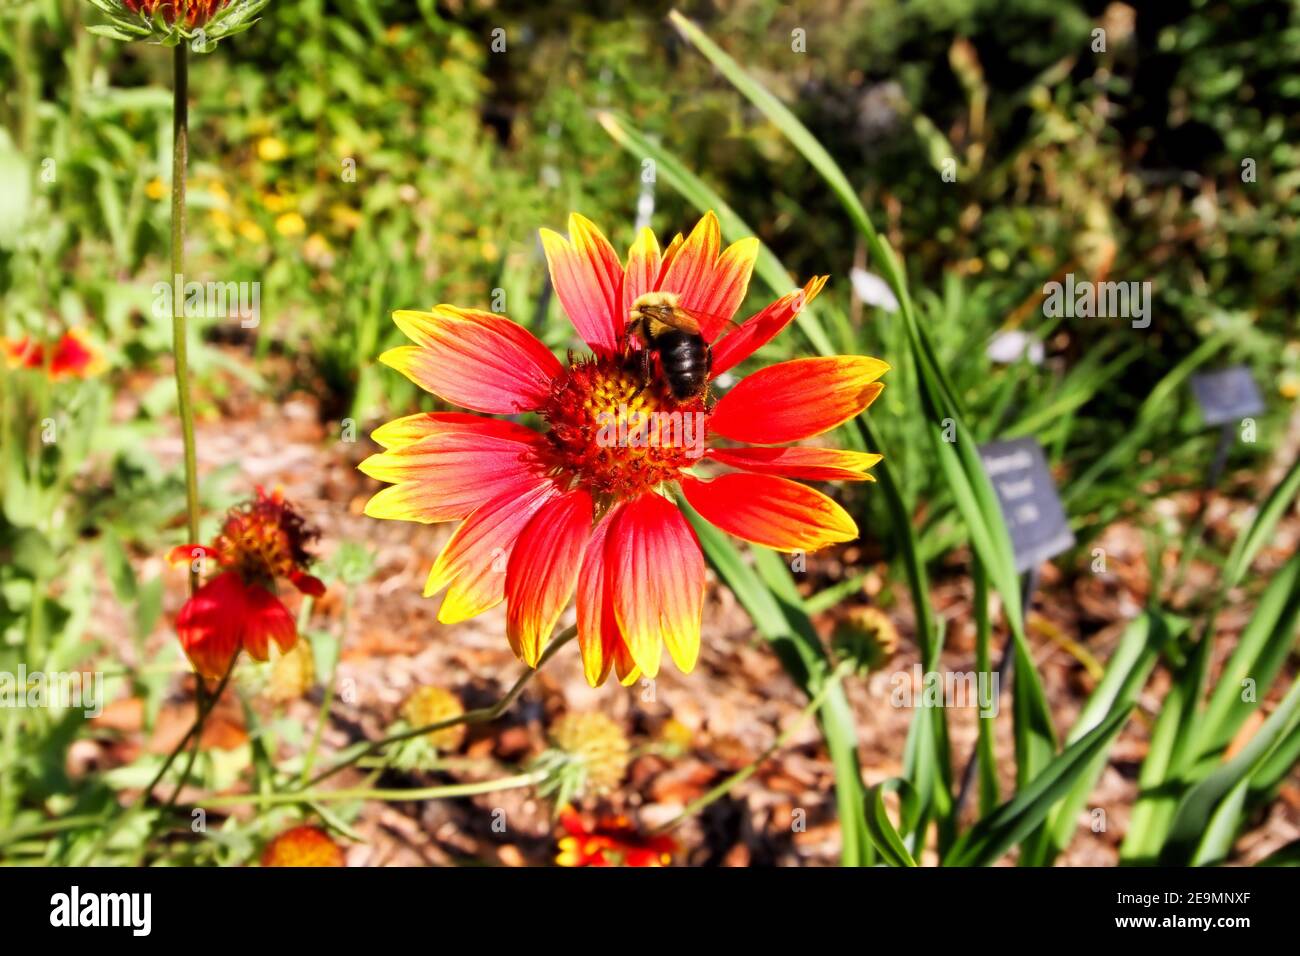 A bumblebee collects the yellow pollen of a bright Gaillardia flower at Lendenwood Gardens in Grove Oklahoma near Grand Lake. Stock Photo